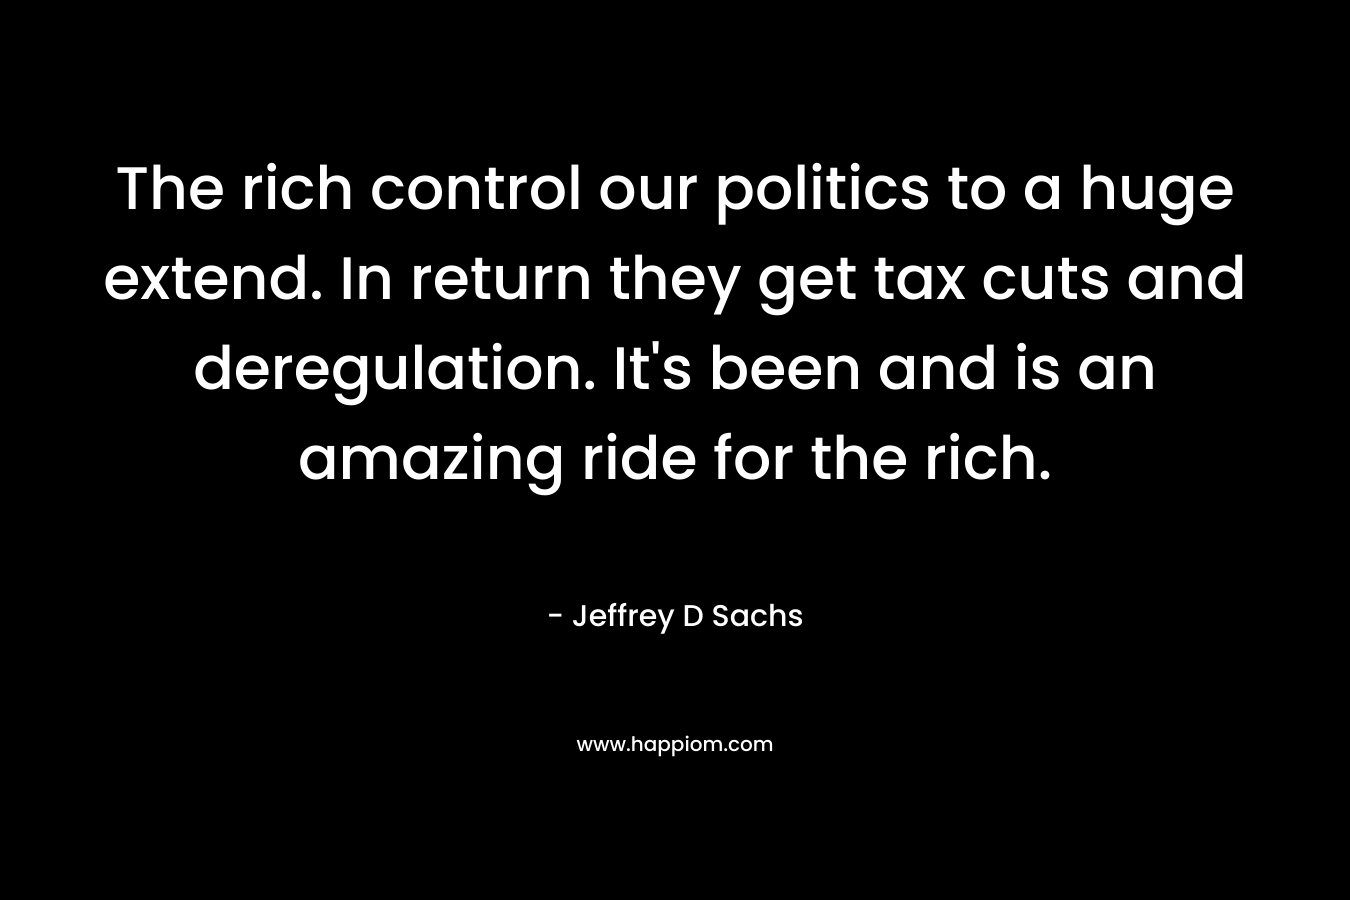 The rich control our politics to a huge extend. In return they get tax cuts and deregulation. It’s been and is an amazing ride for the rich. – Jeffrey D Sachs